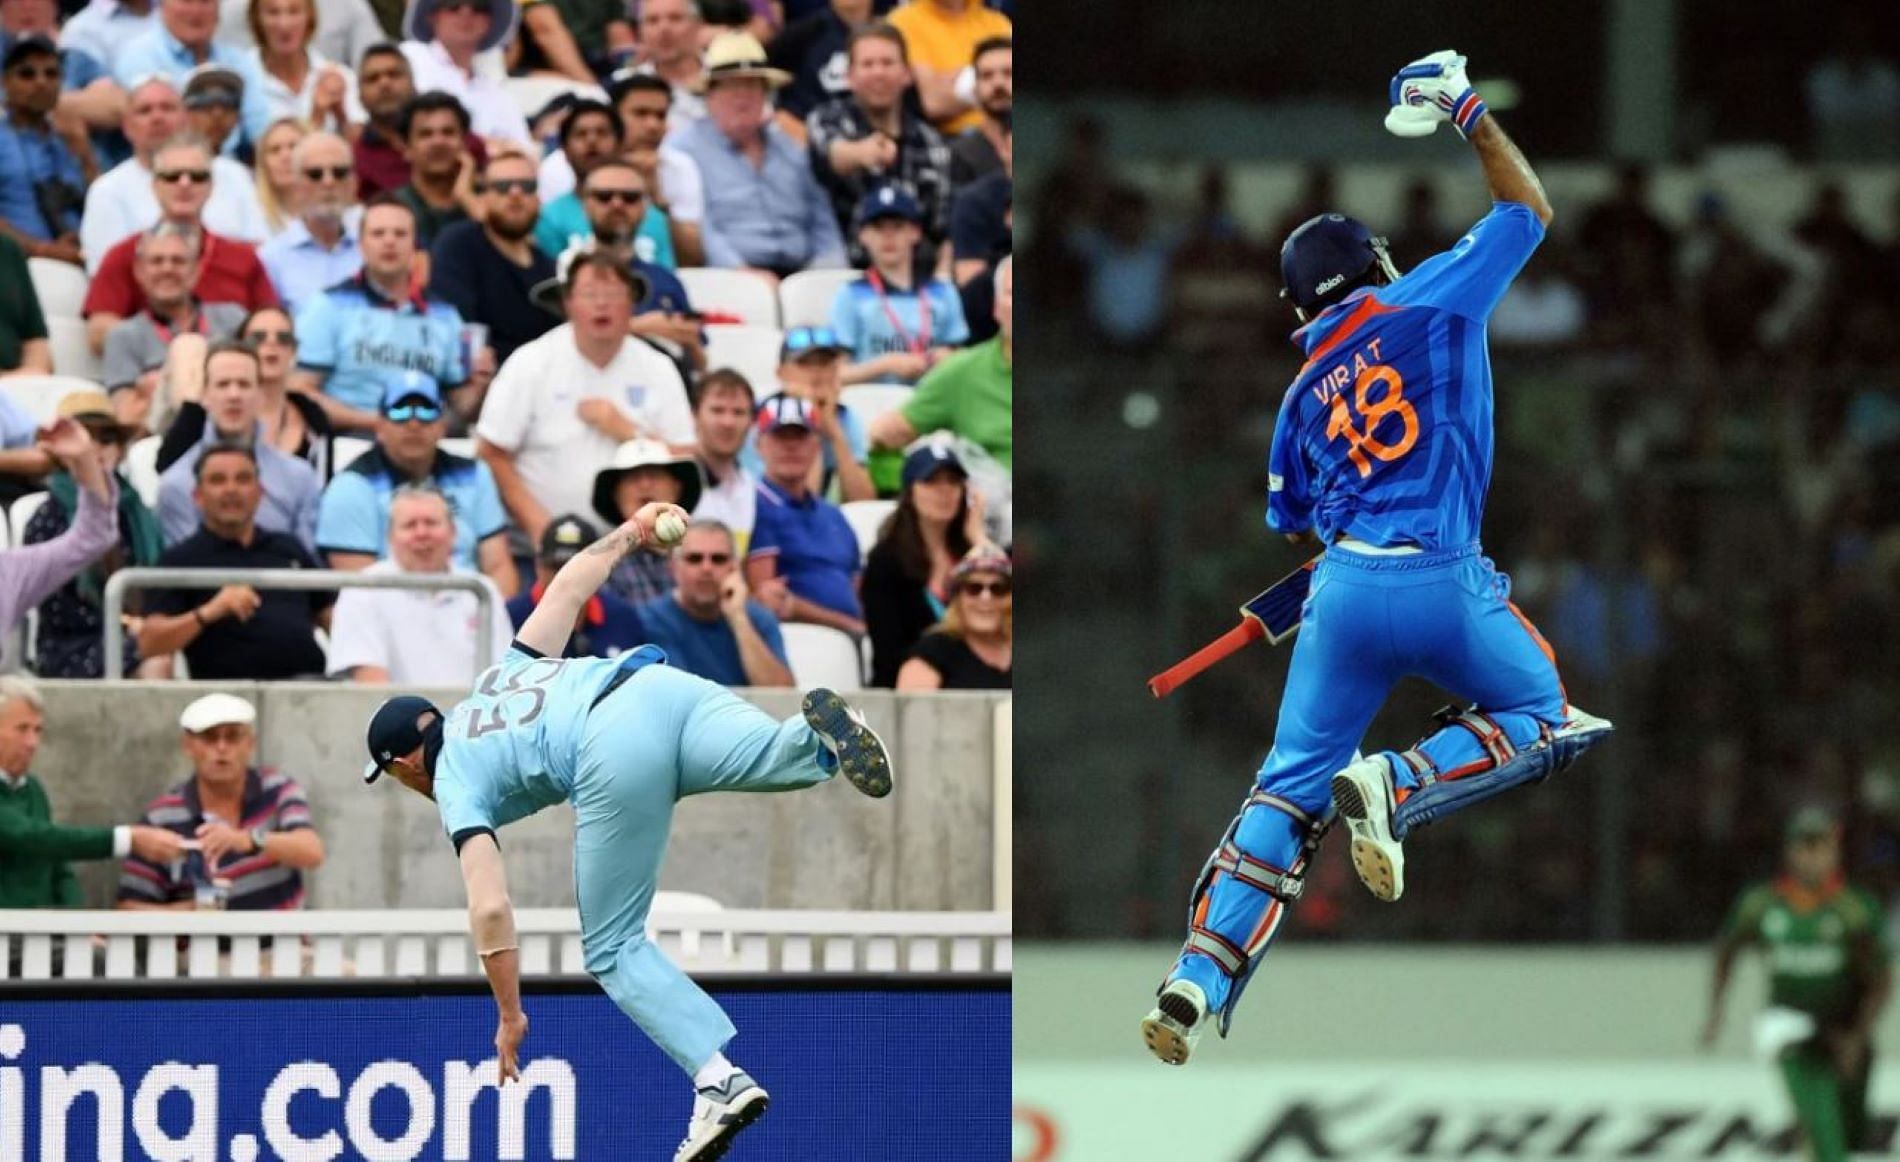 World Cup openers have produced several memorable moments by superstar players